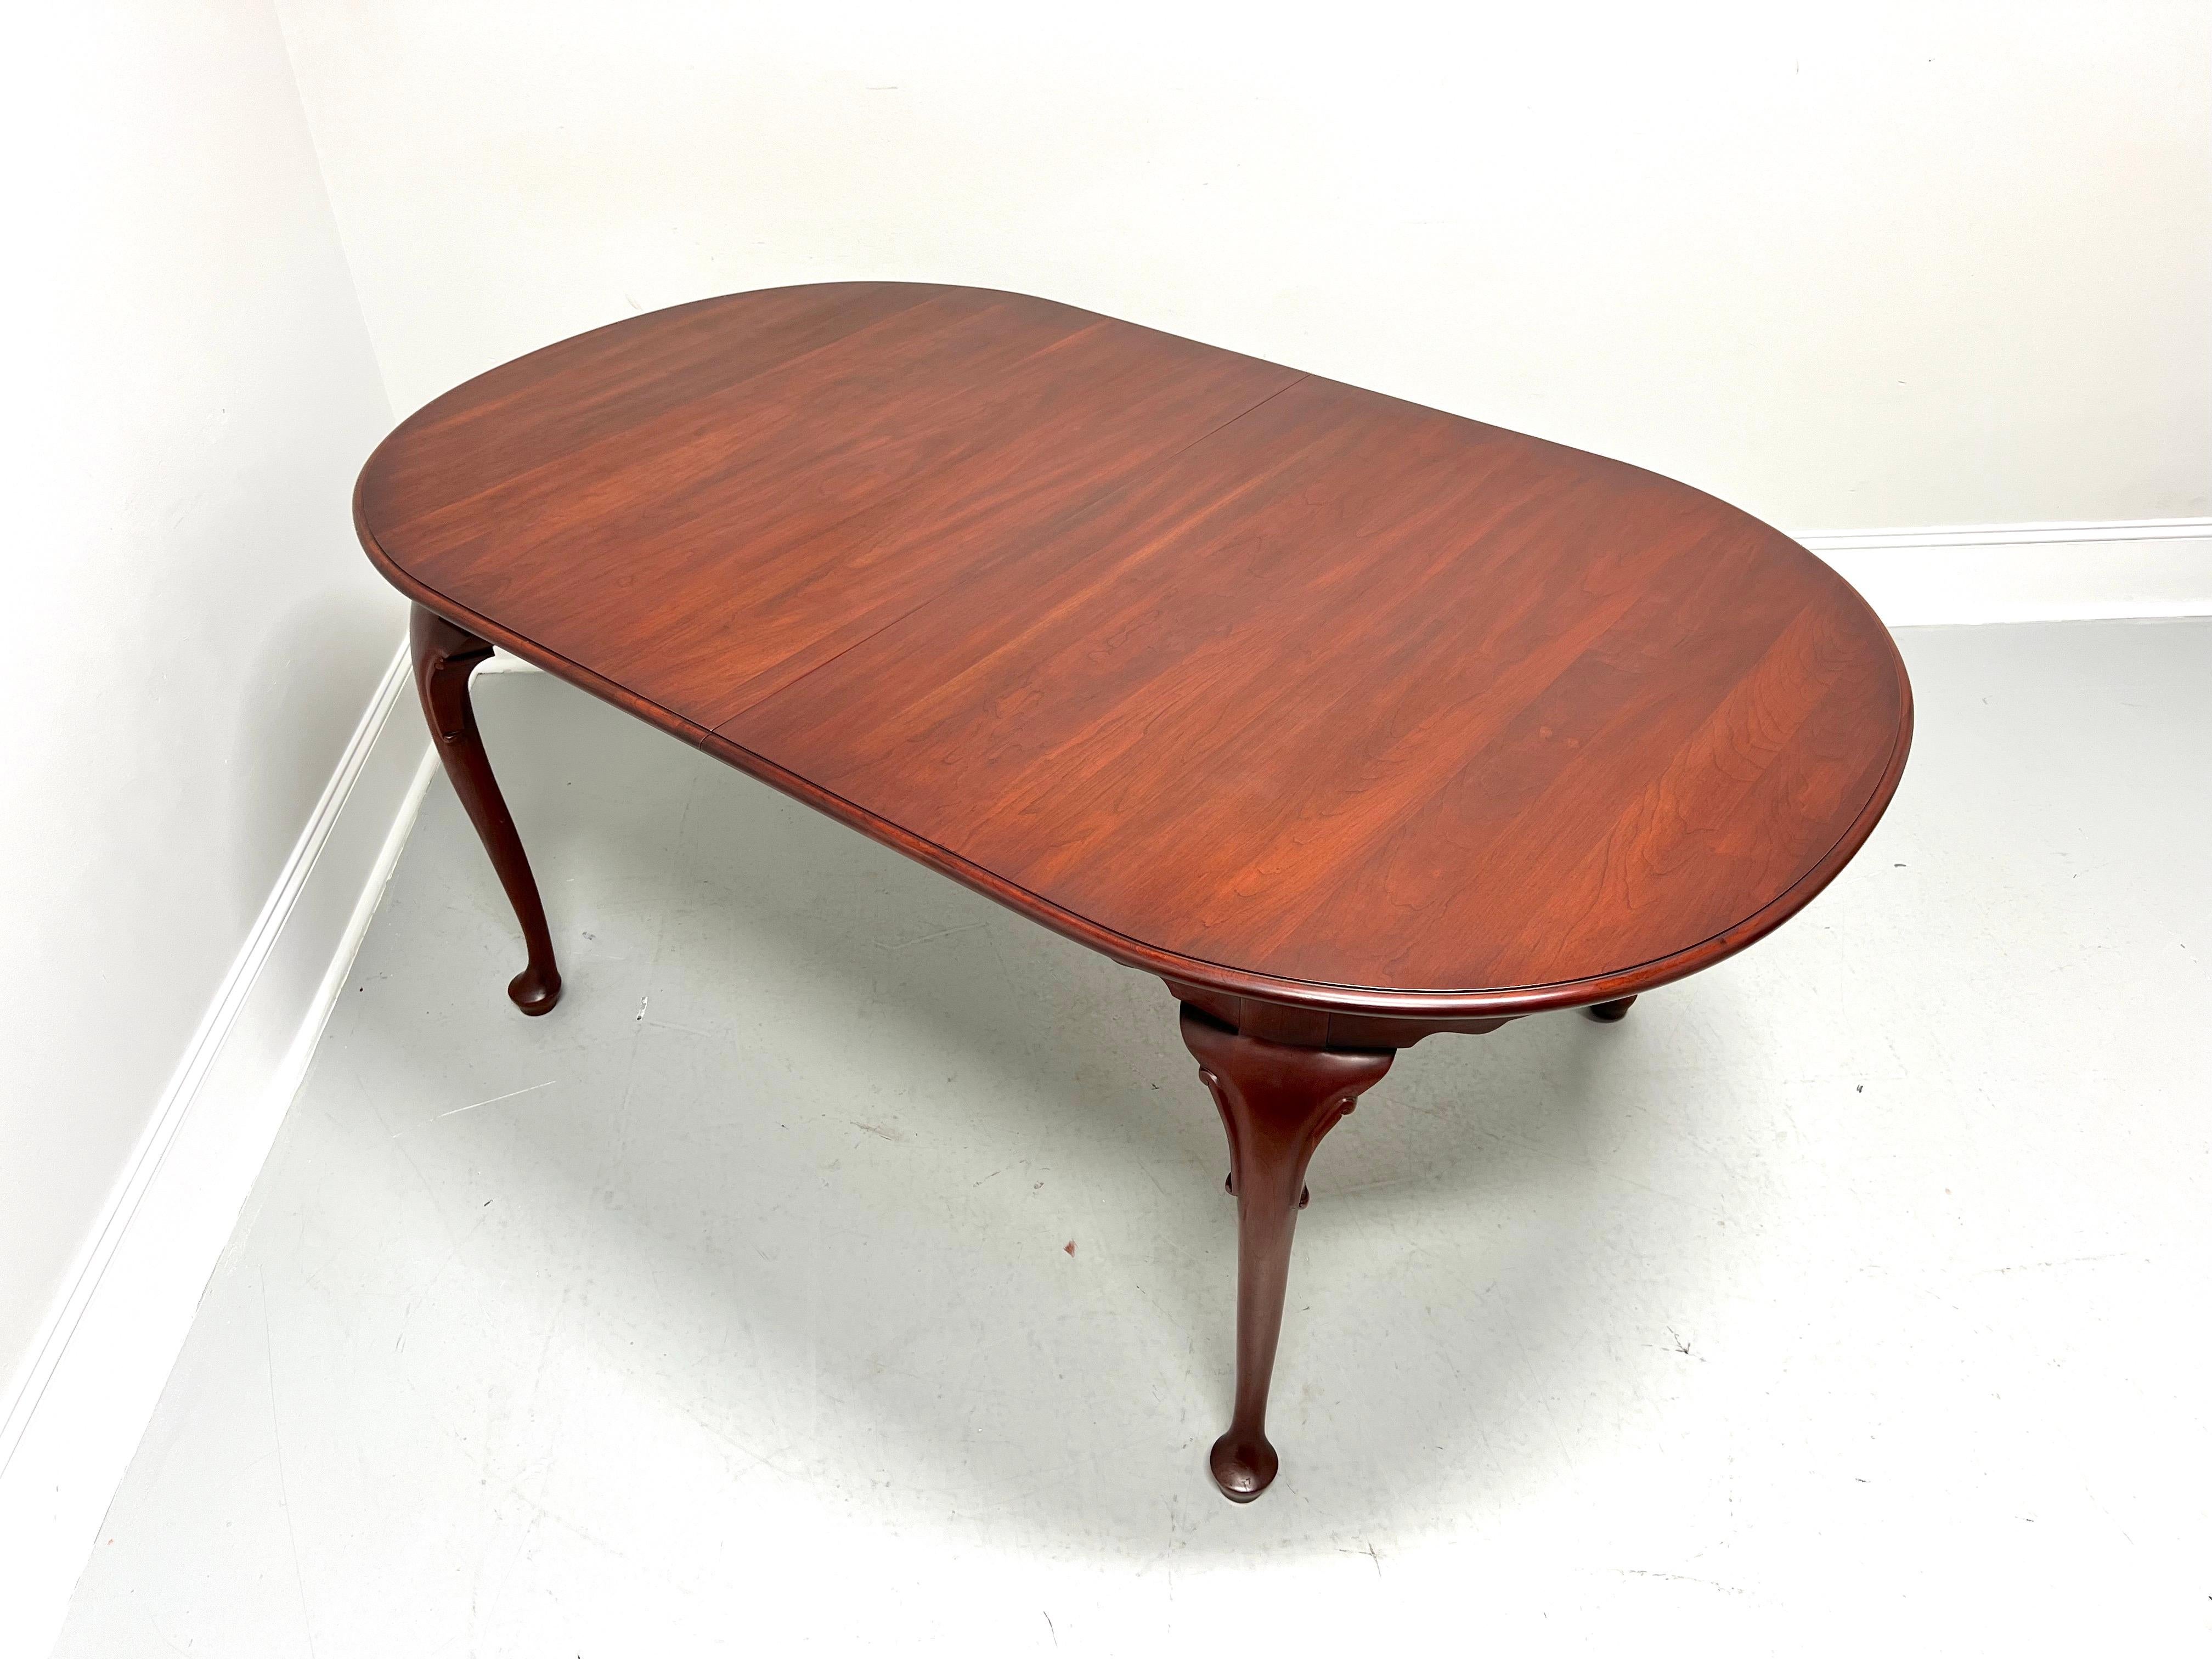 A Queen Anne style oval dining table by Henkel Harris of Winchester, Virginia, USA. Solid wild black cherry wood with bevel edge to the top, carved apron, decoratively carved knees, cabriole legs, and pad feet. Includes two 16 inch extension leaves